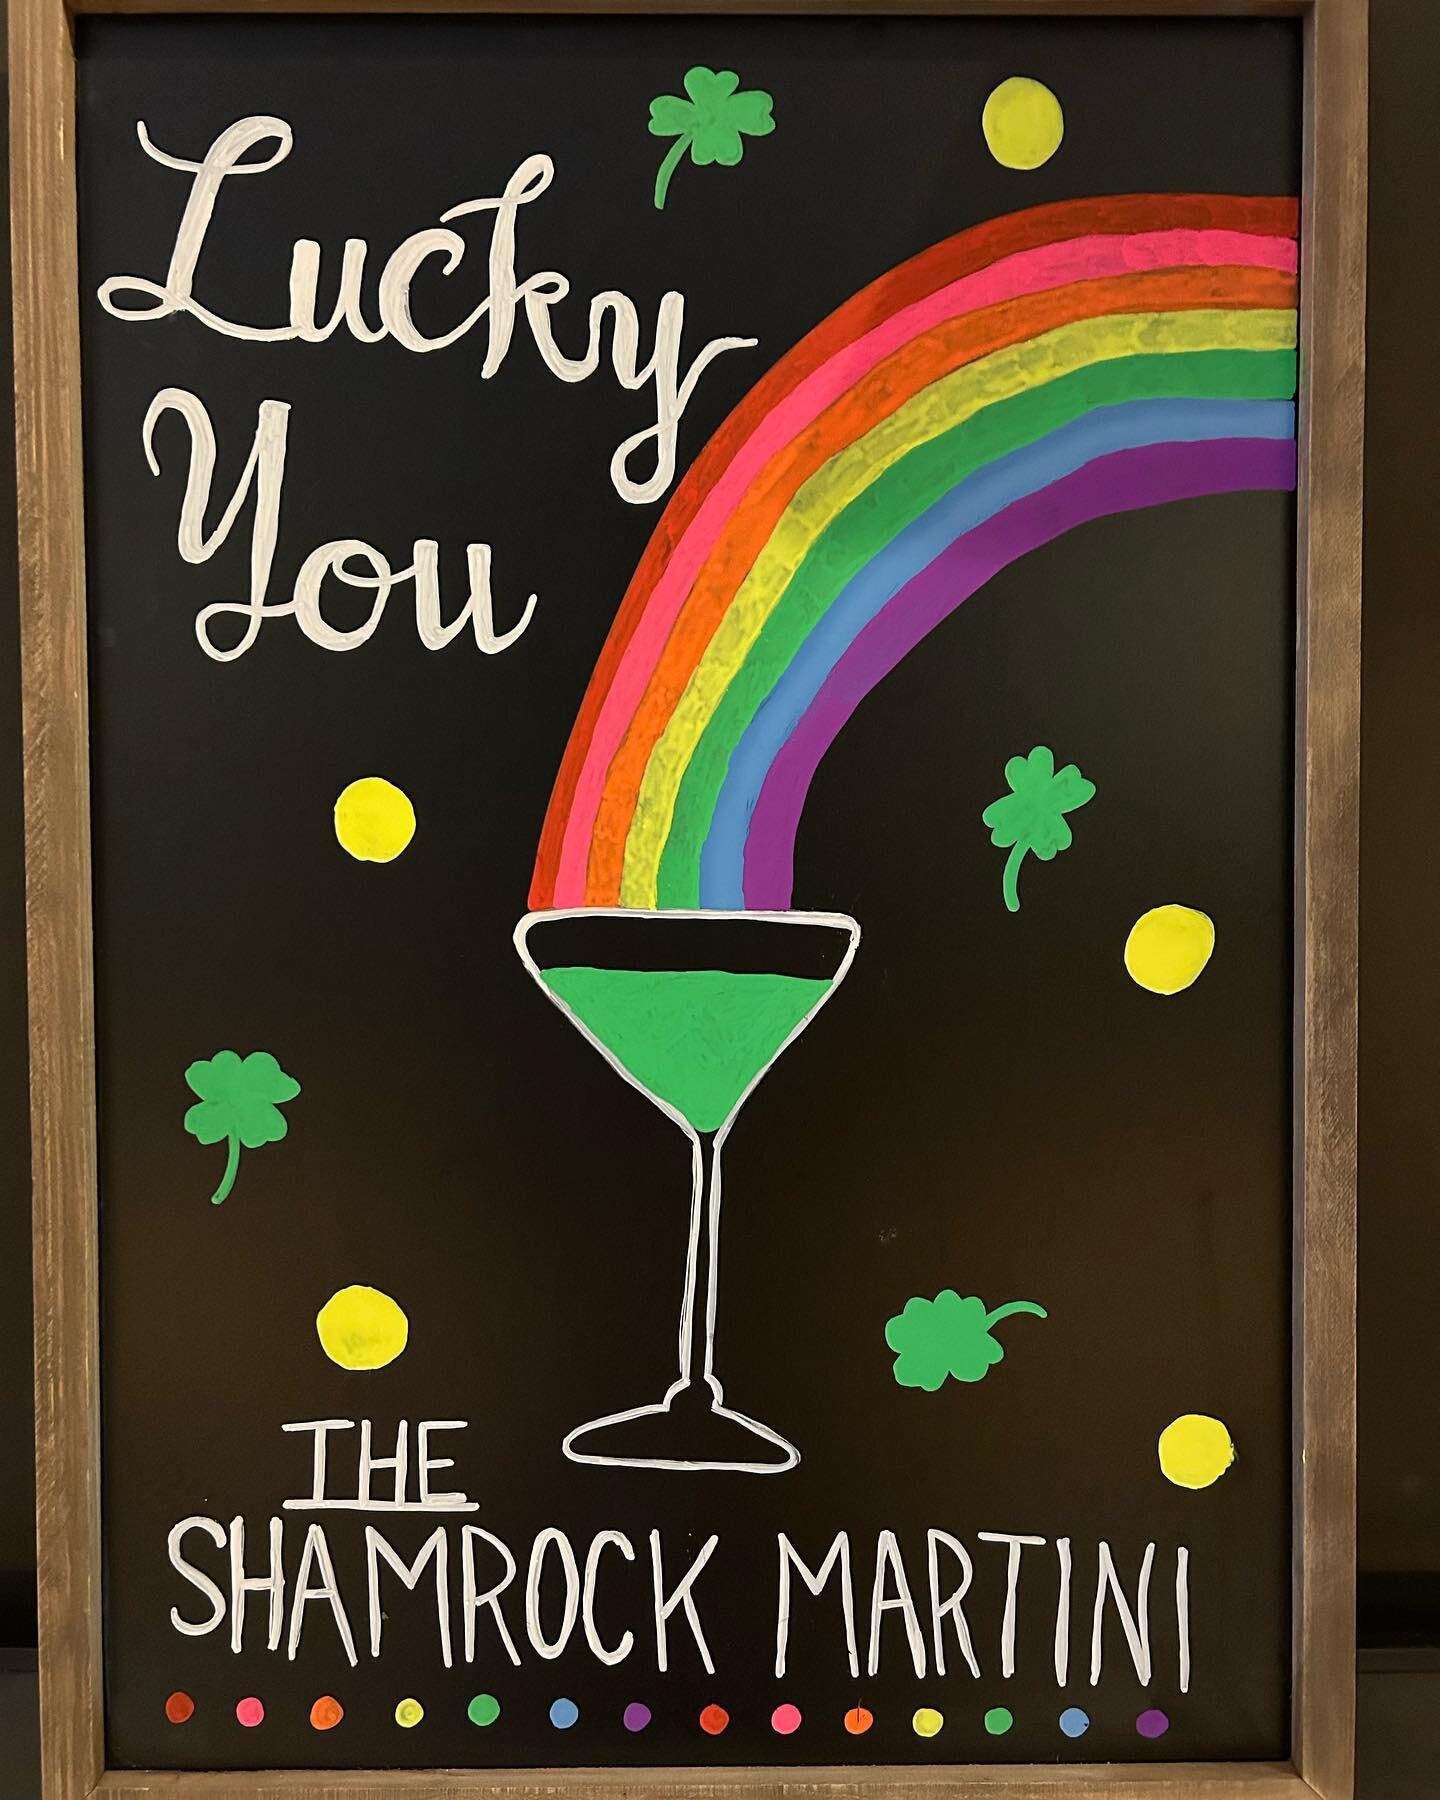 &ldquo;Lucky You&rdquo;, we decided to take a March classic and turn it into a martini! Come out and try our shamrock inspired drink!